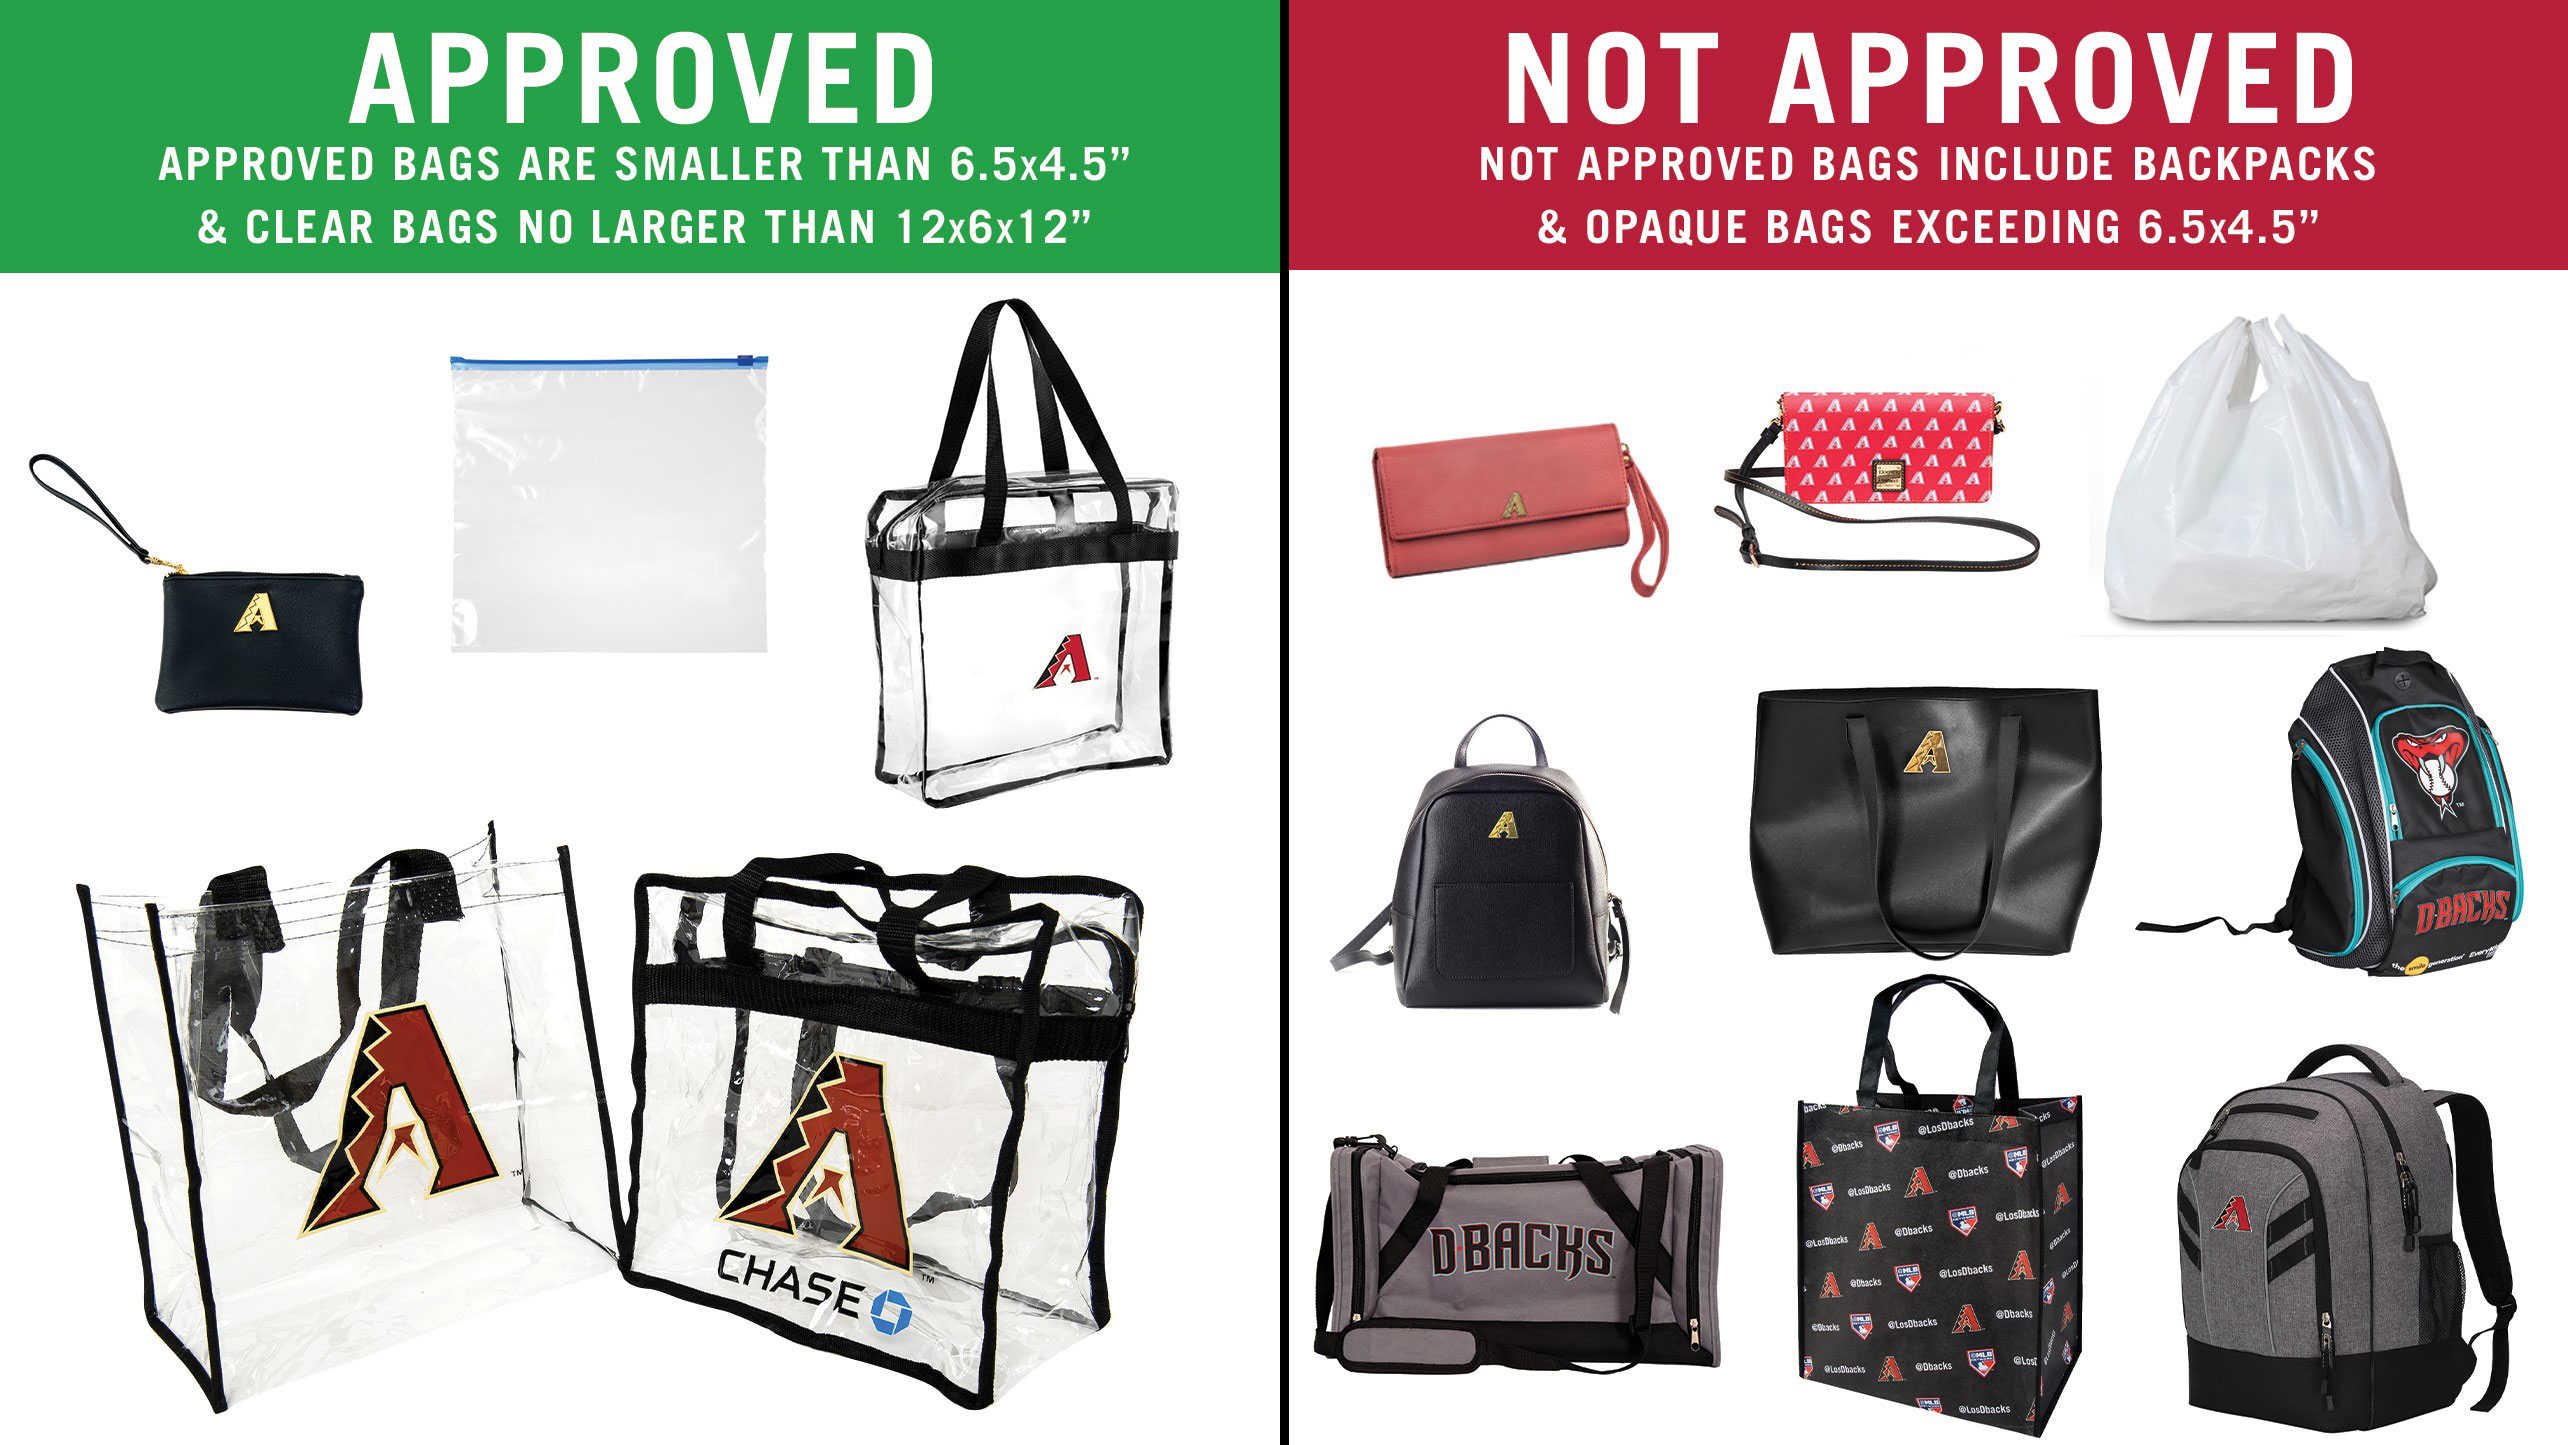 Can I Bring a Backpack to a Baseball Game? Discover the Stadium Bag Policies!